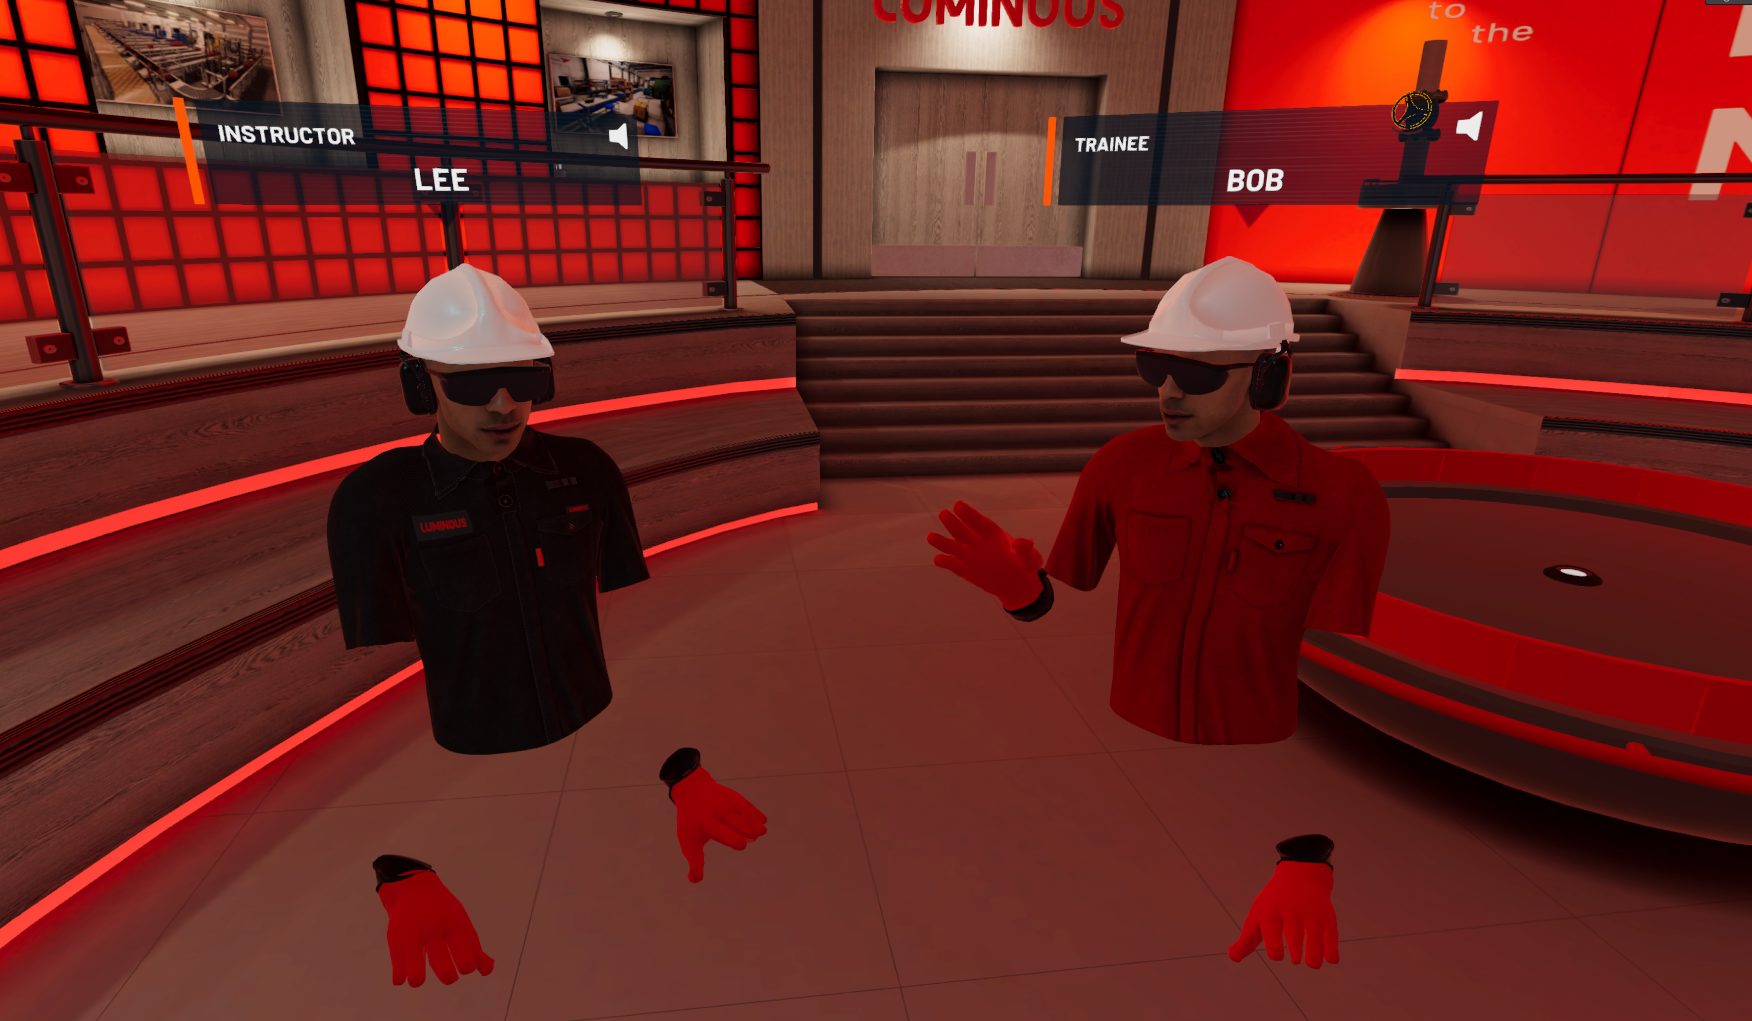 virtual reality trainer and trainee in the luminous lobby